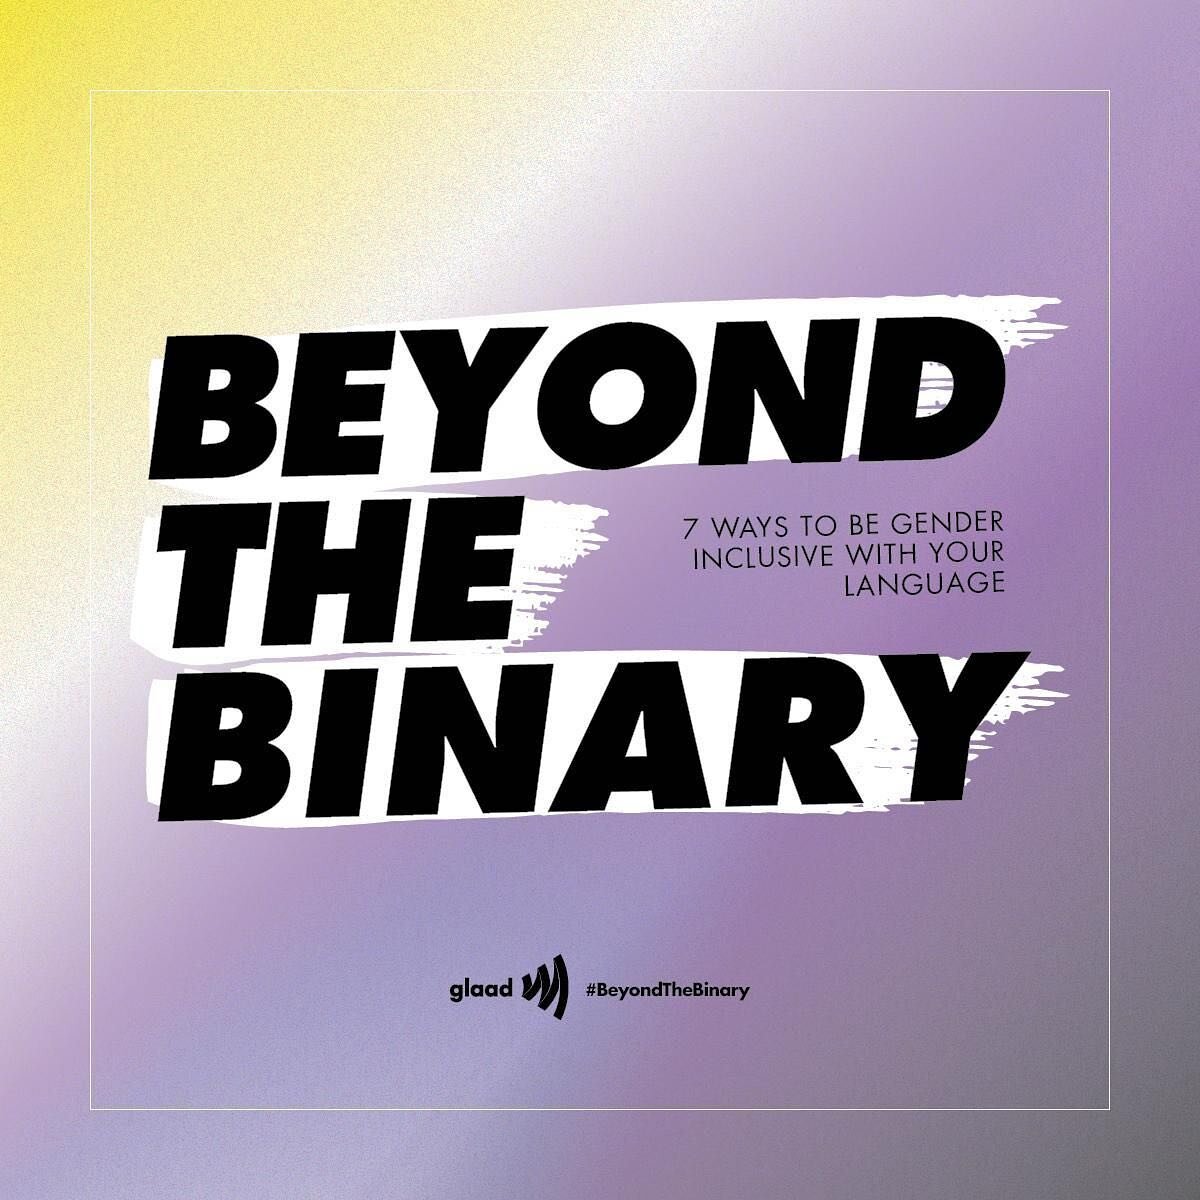 Today is International Non-Binary People&rsquo;s day! Here are a few easy ways to be gender inclusive with your language. Credits to @glaad 

#nonbinary #genderinclusive #hexagonux